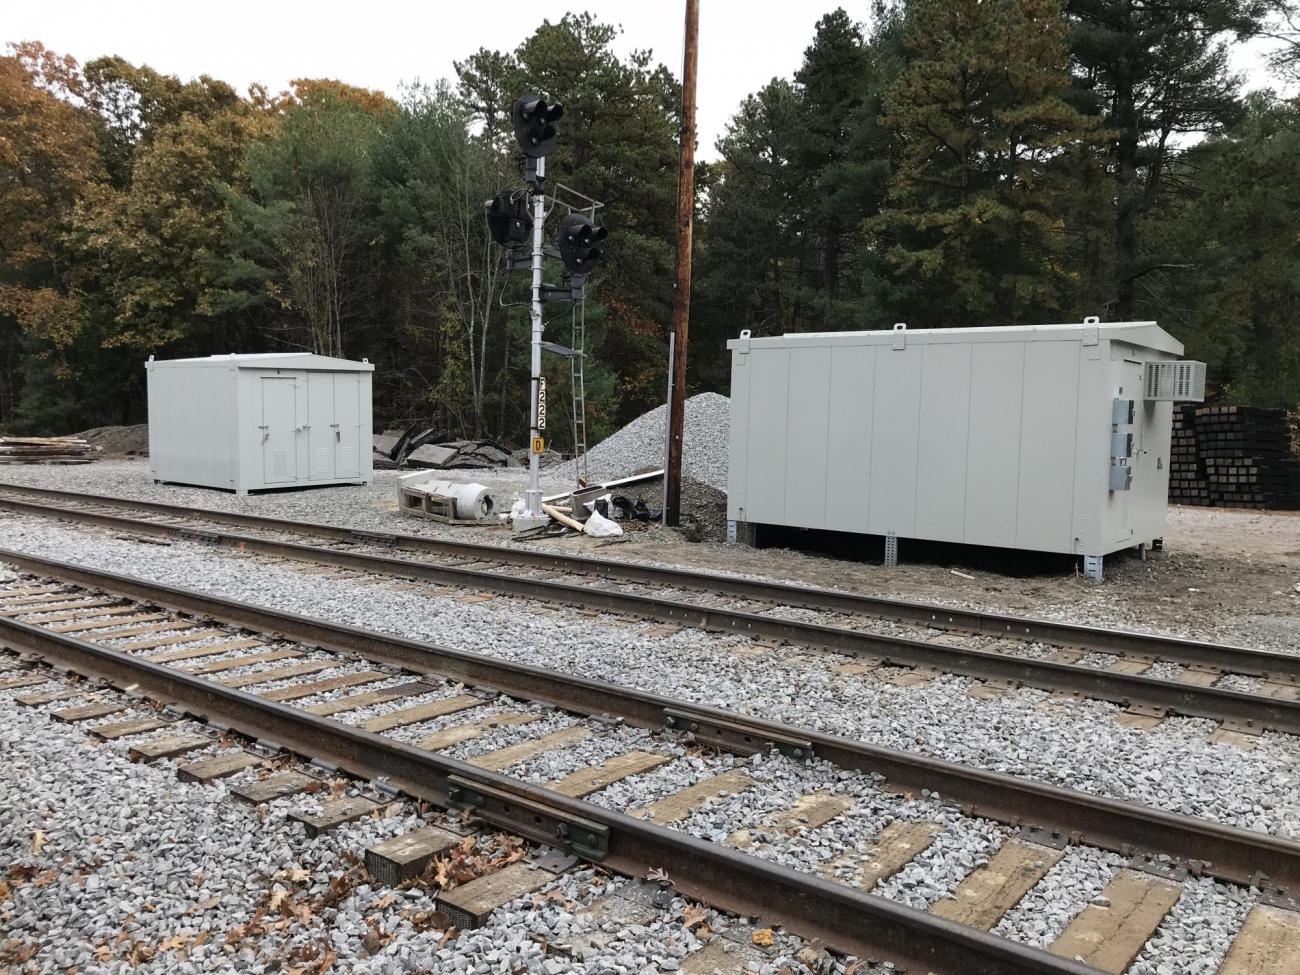 New signal houses were delivered before integrating the track into the system (October 2019)